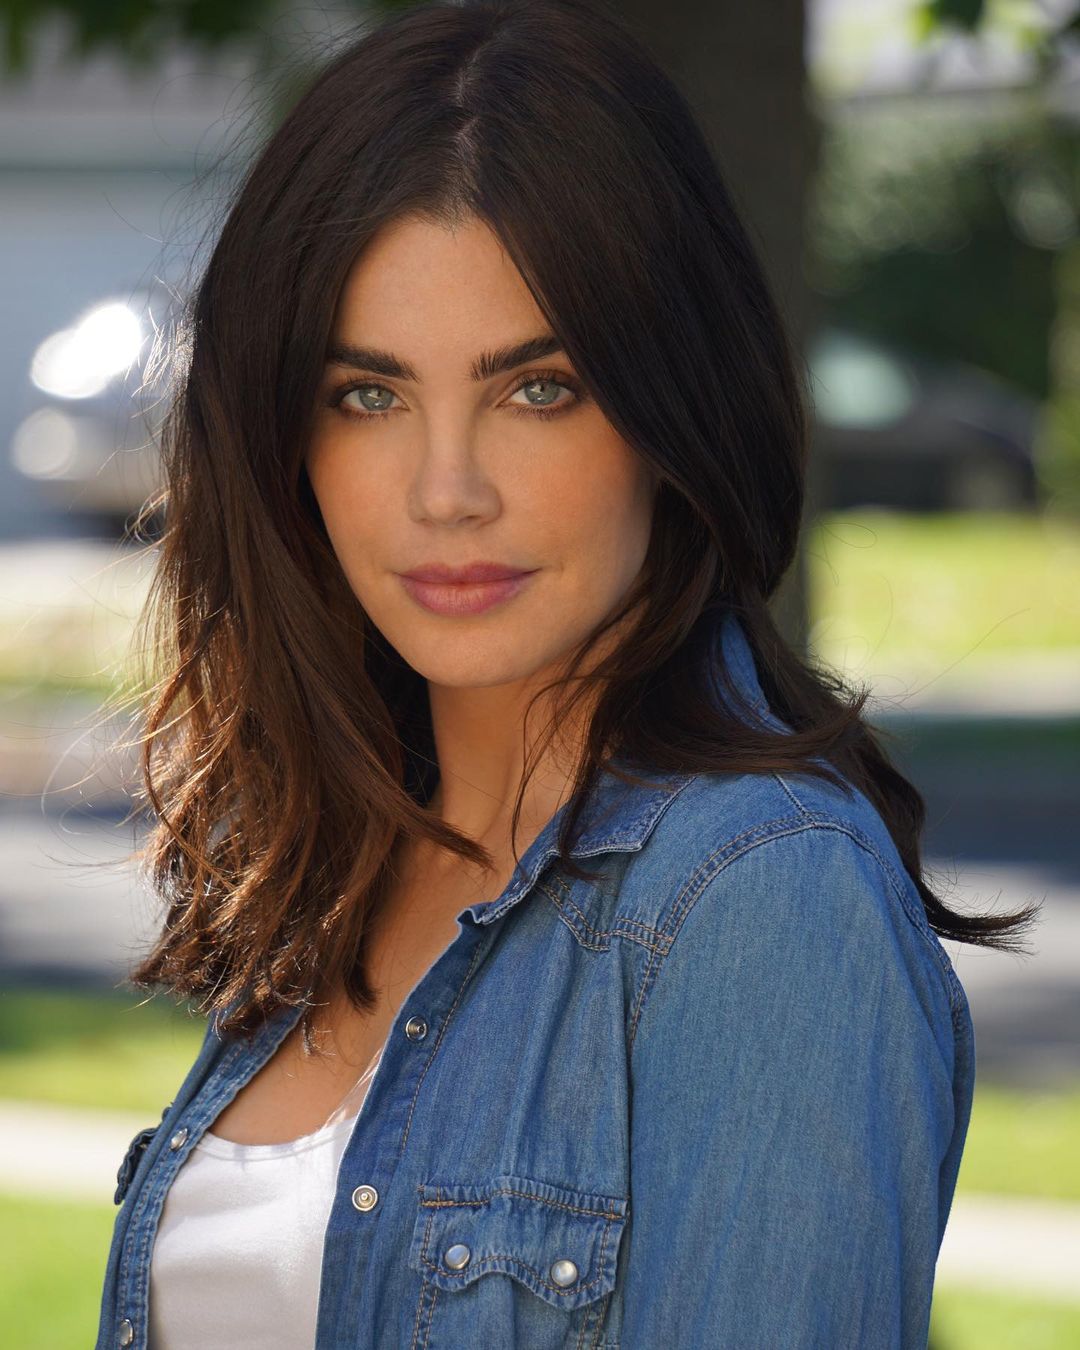 Jillian Murray was interested in acting from a young age.